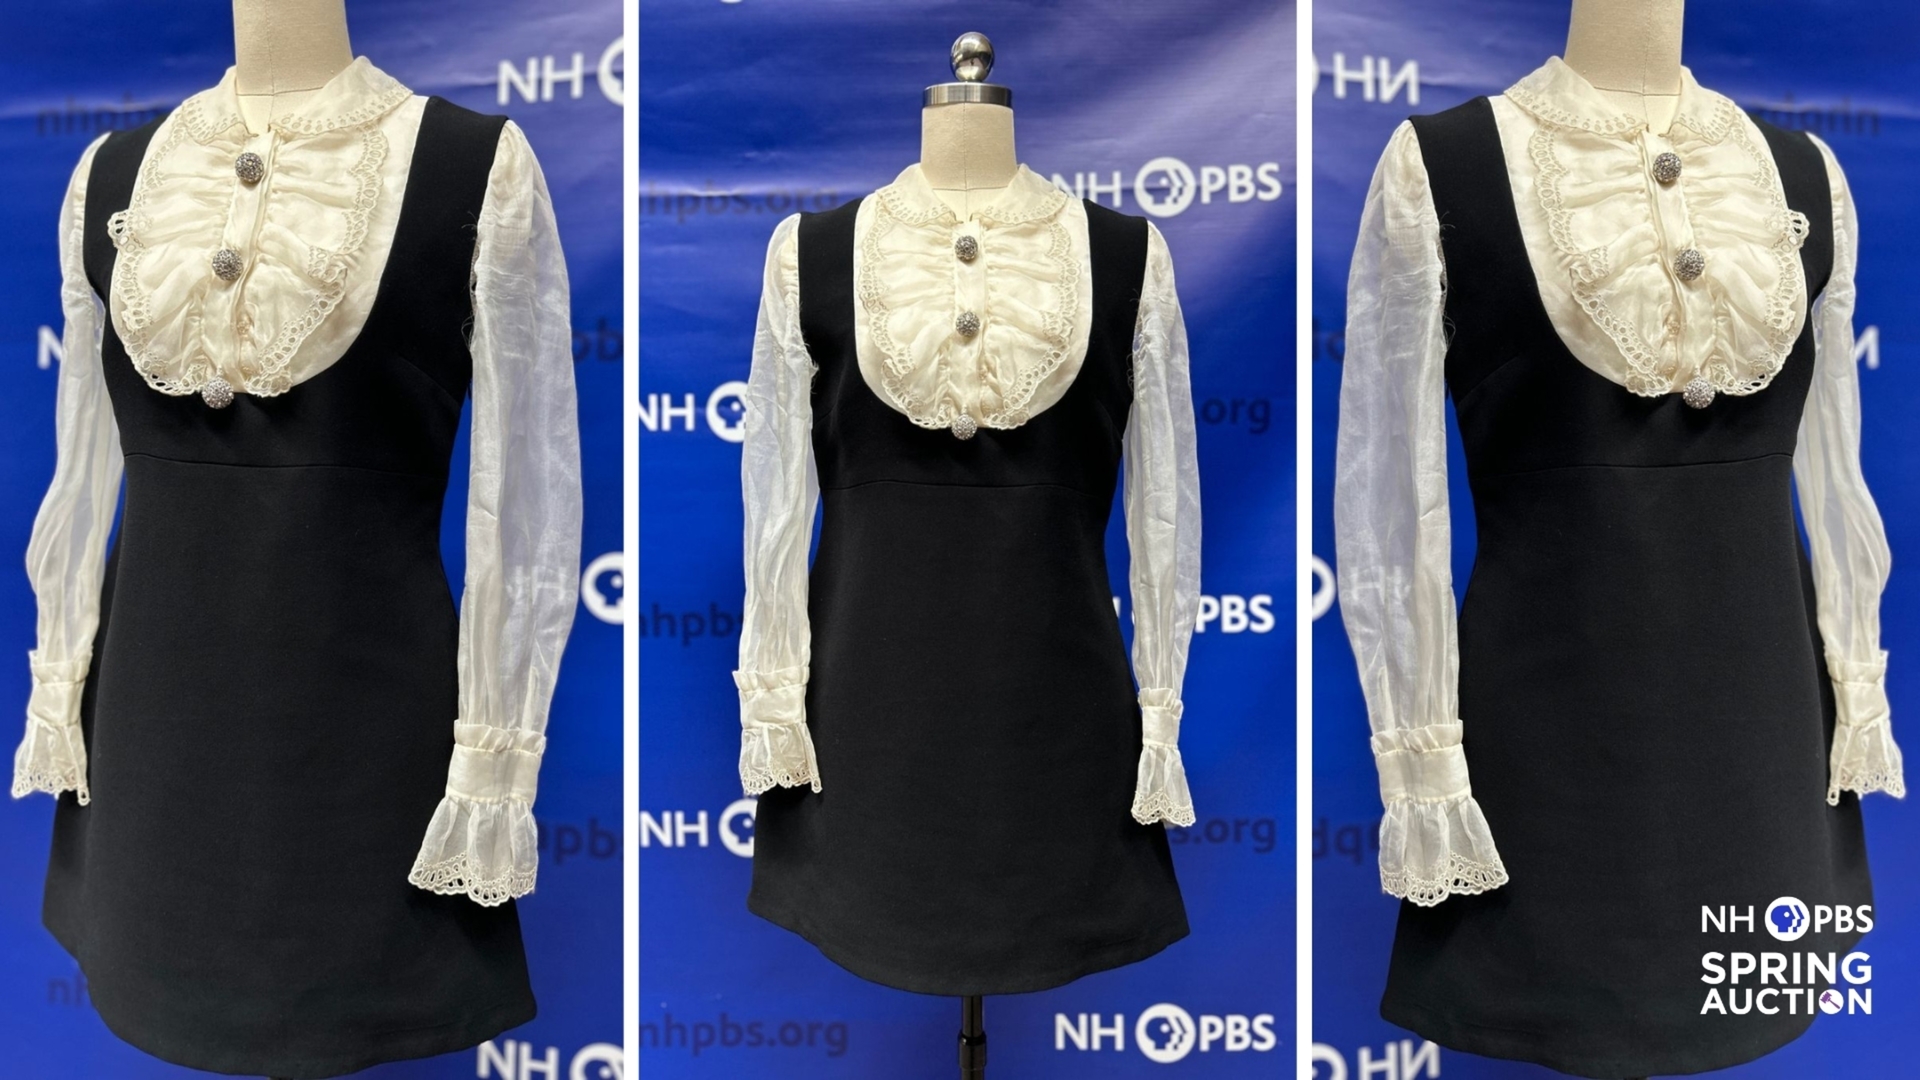 NHPBS Announces Comedian/Actress Sarah Silverman’s Donated Dress for ...